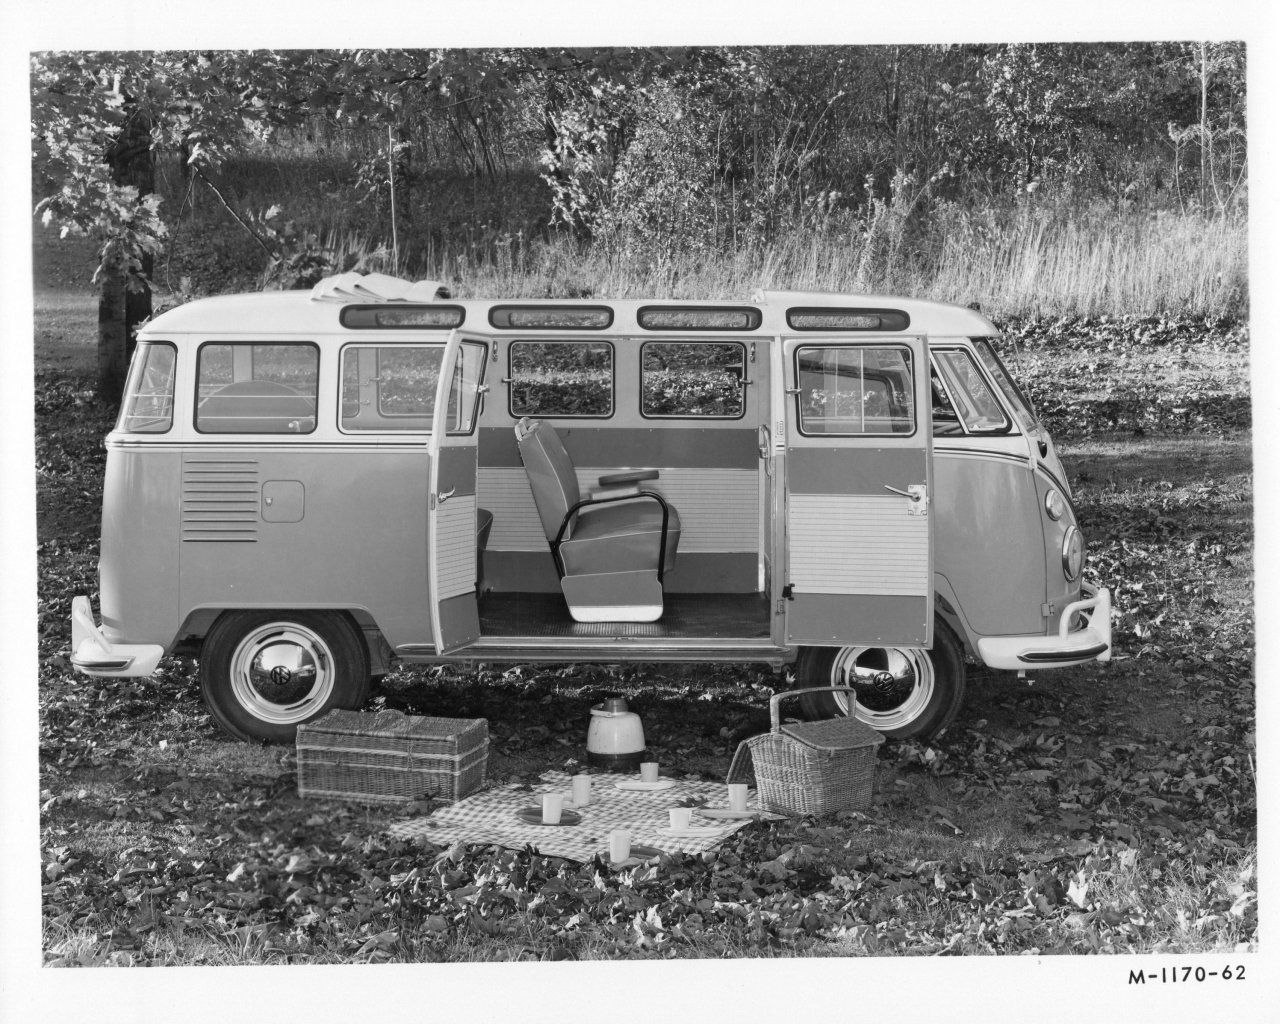 vw bus with windows on top